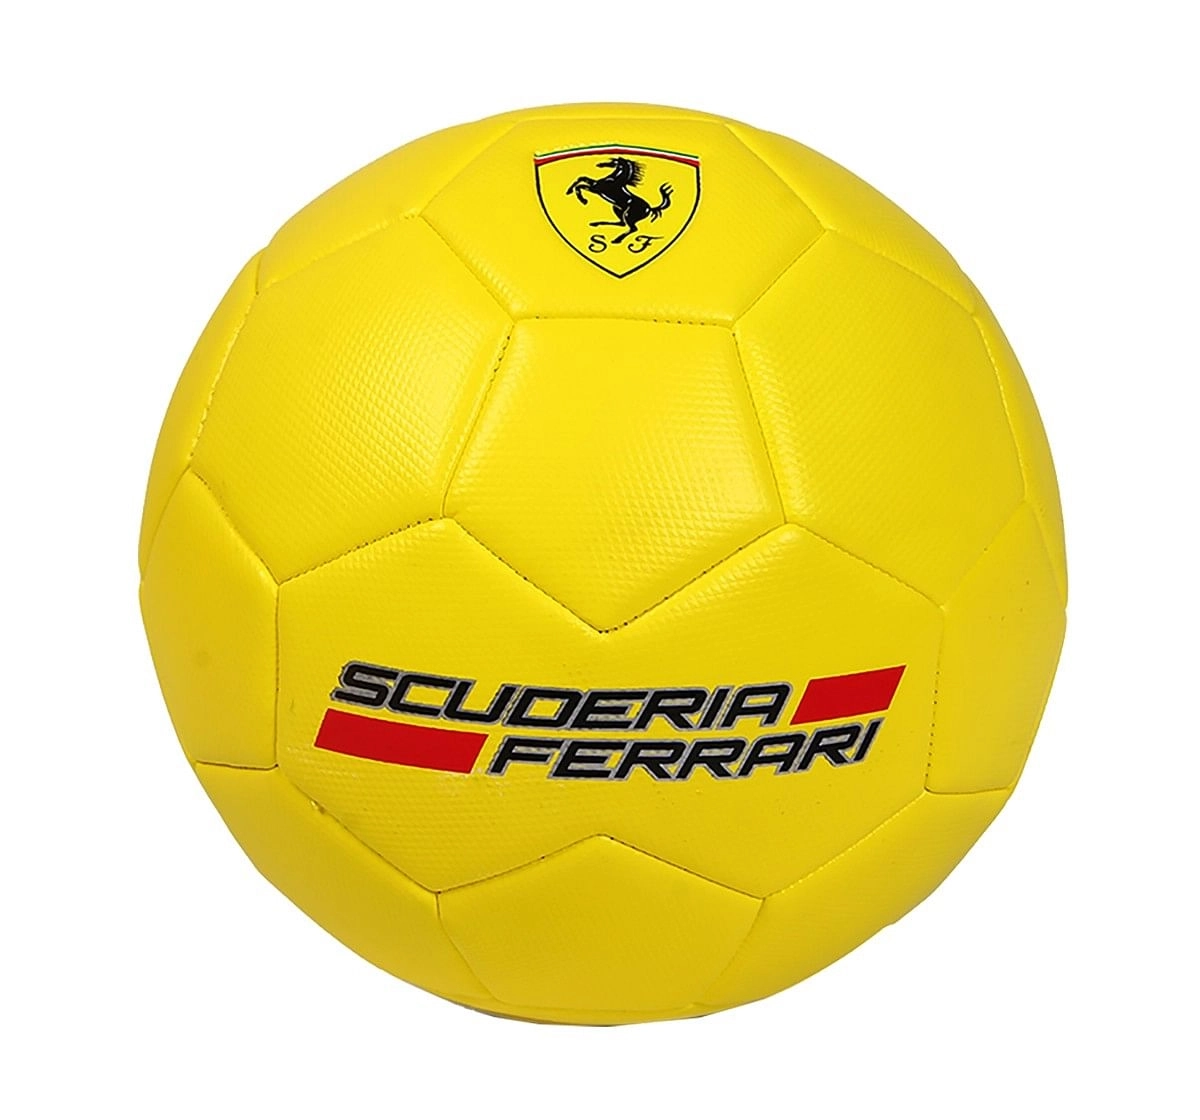 Ferrari Soccer Ball - Sports & Accessories for Kids age 5Y+ (Yellow)